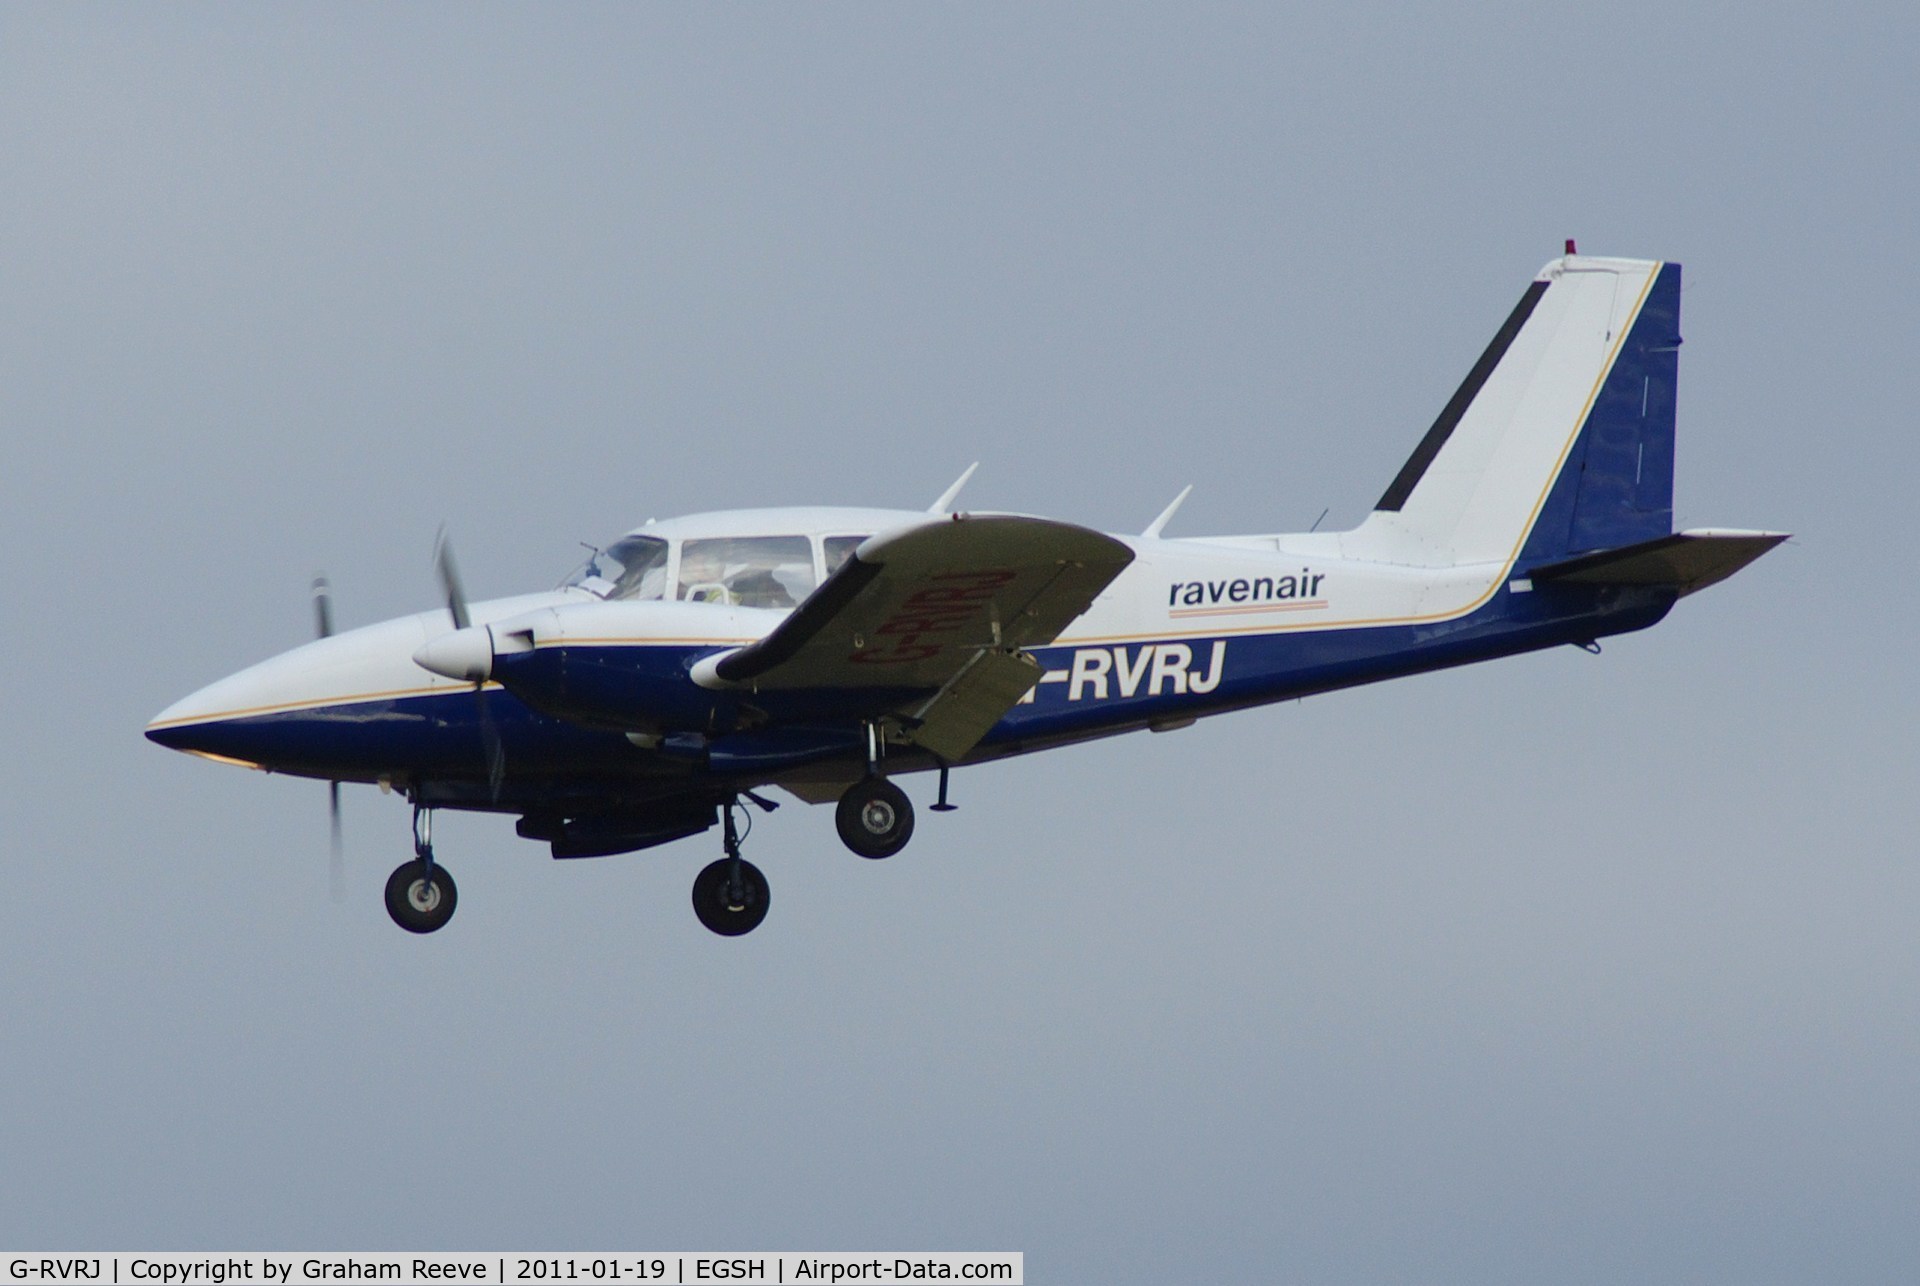 G-RVRJ, 1973 Piper PA-23-250 Aztec E C/N 27-7305004, About to touch down.